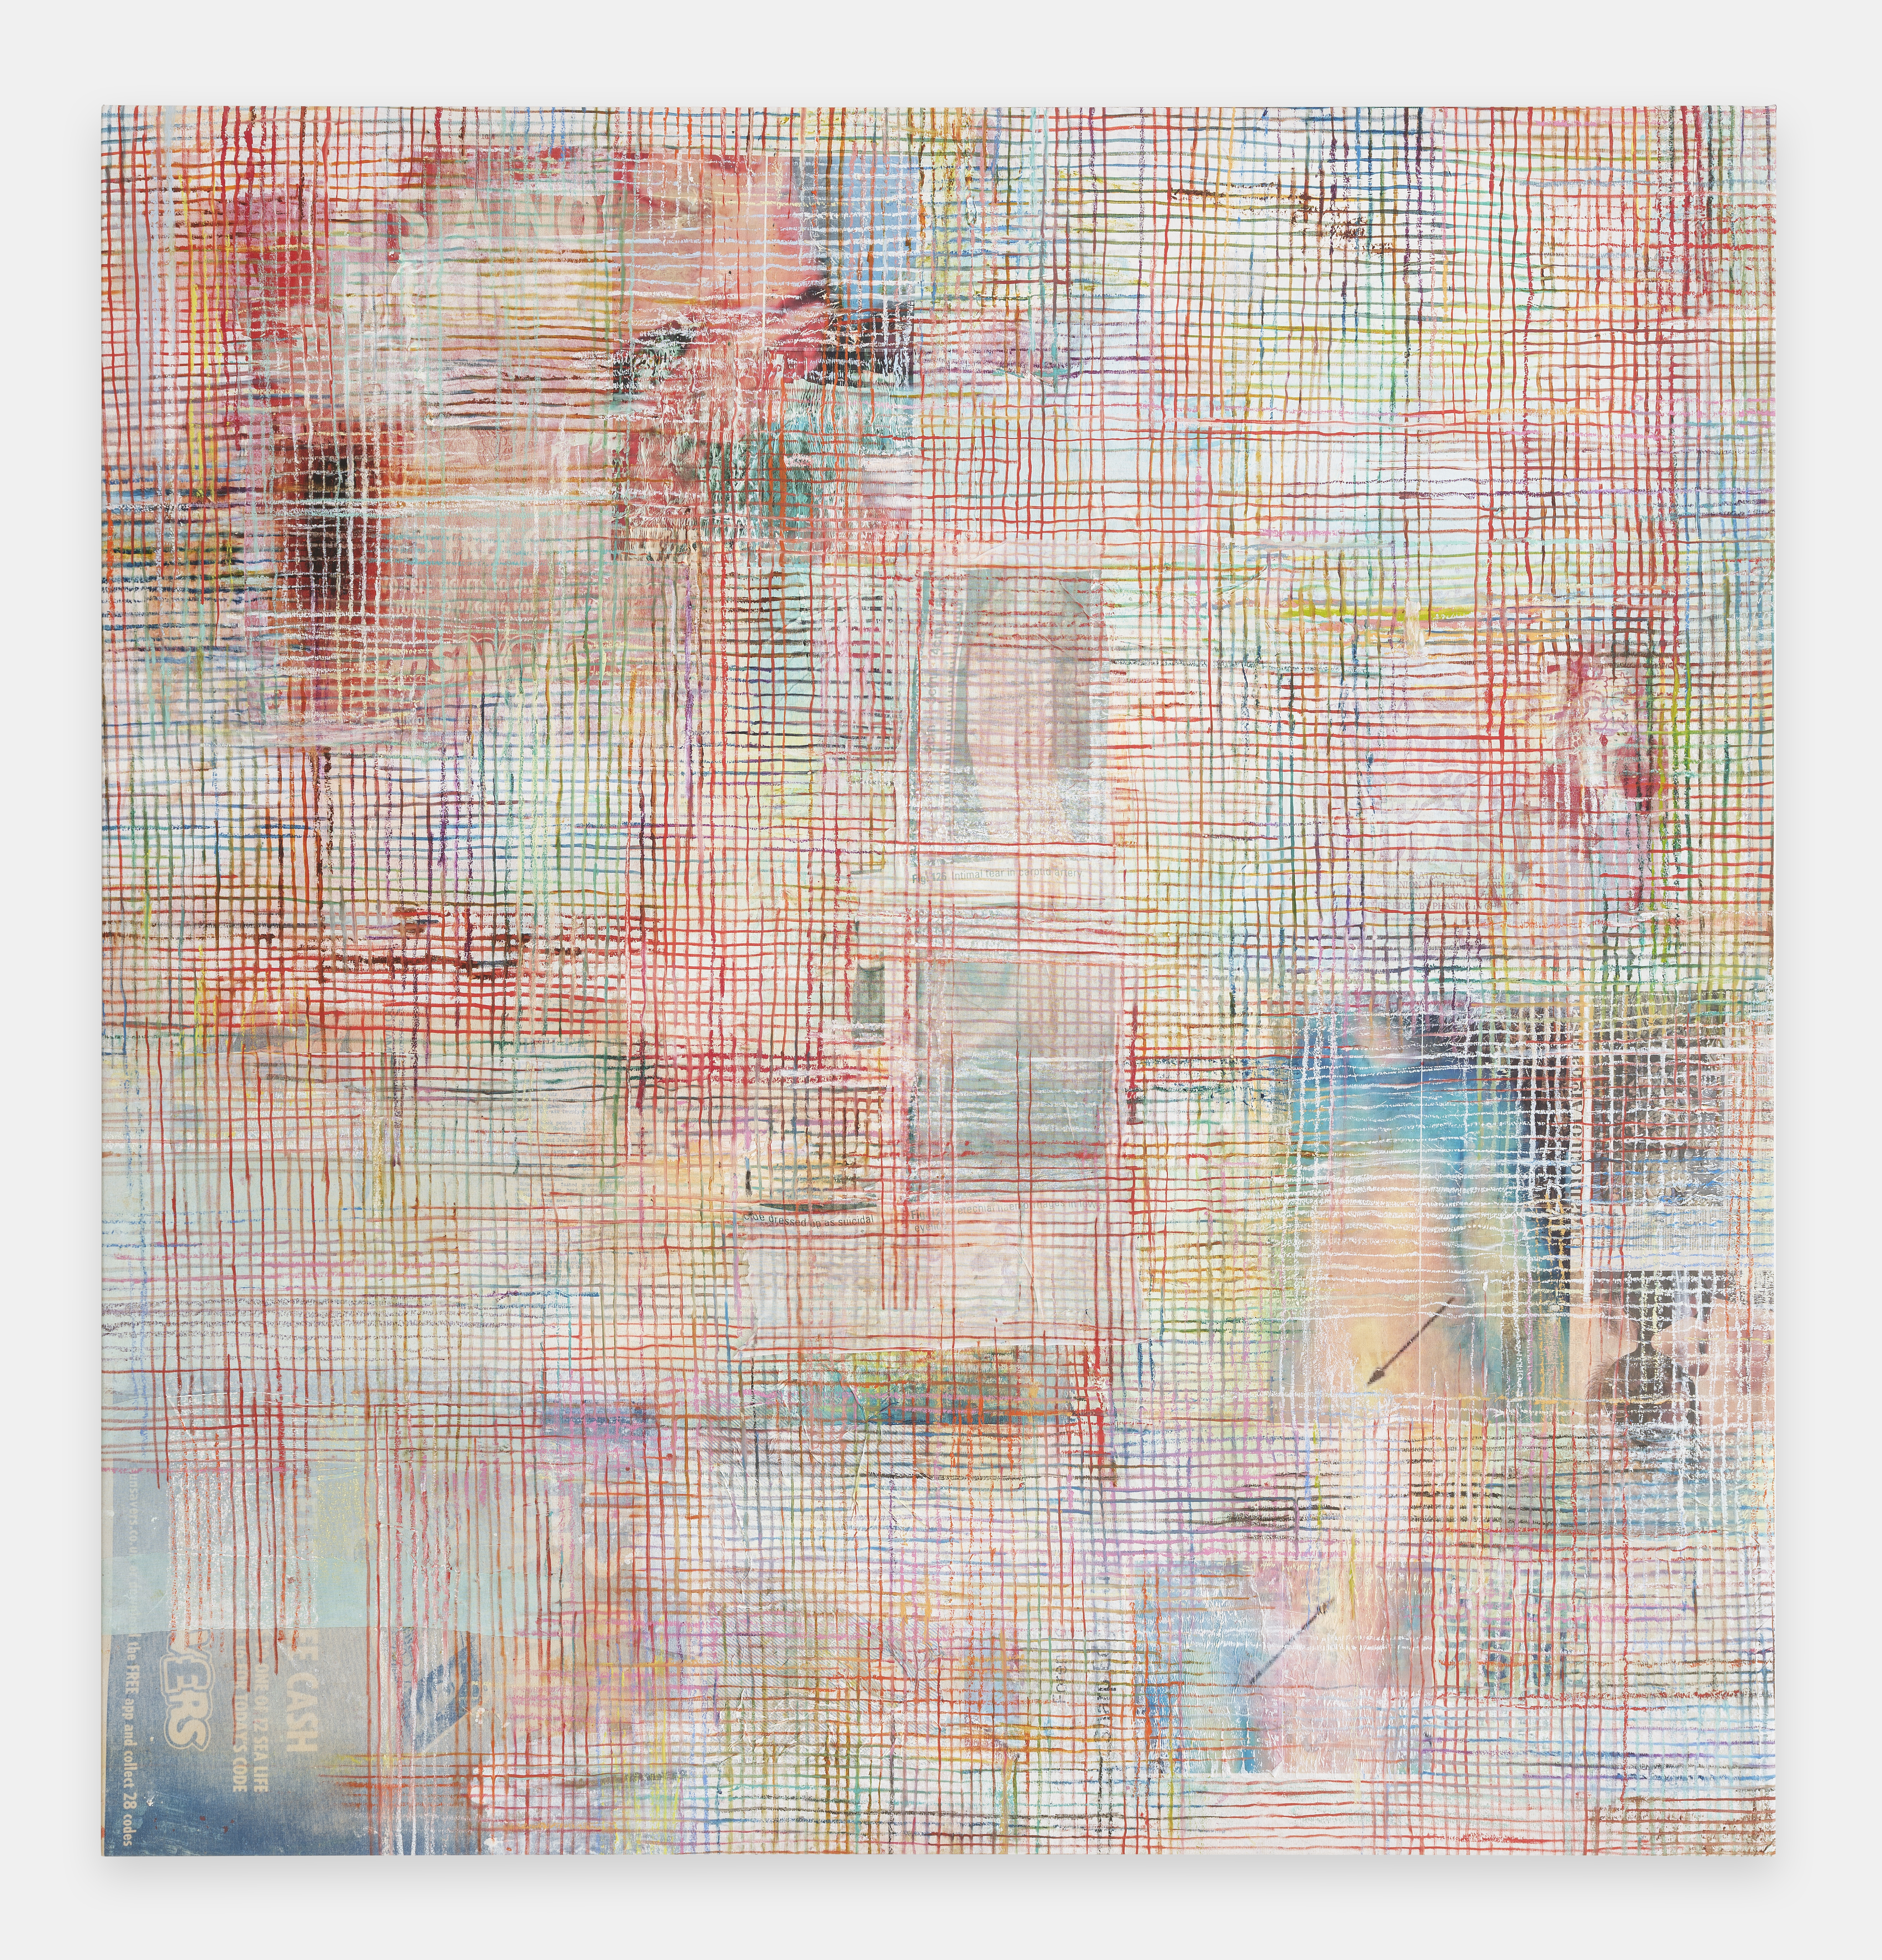 Mandy El-Sayegh, Net-Grid (Lucky Fiver), 2021. Oil and mixed media on linen